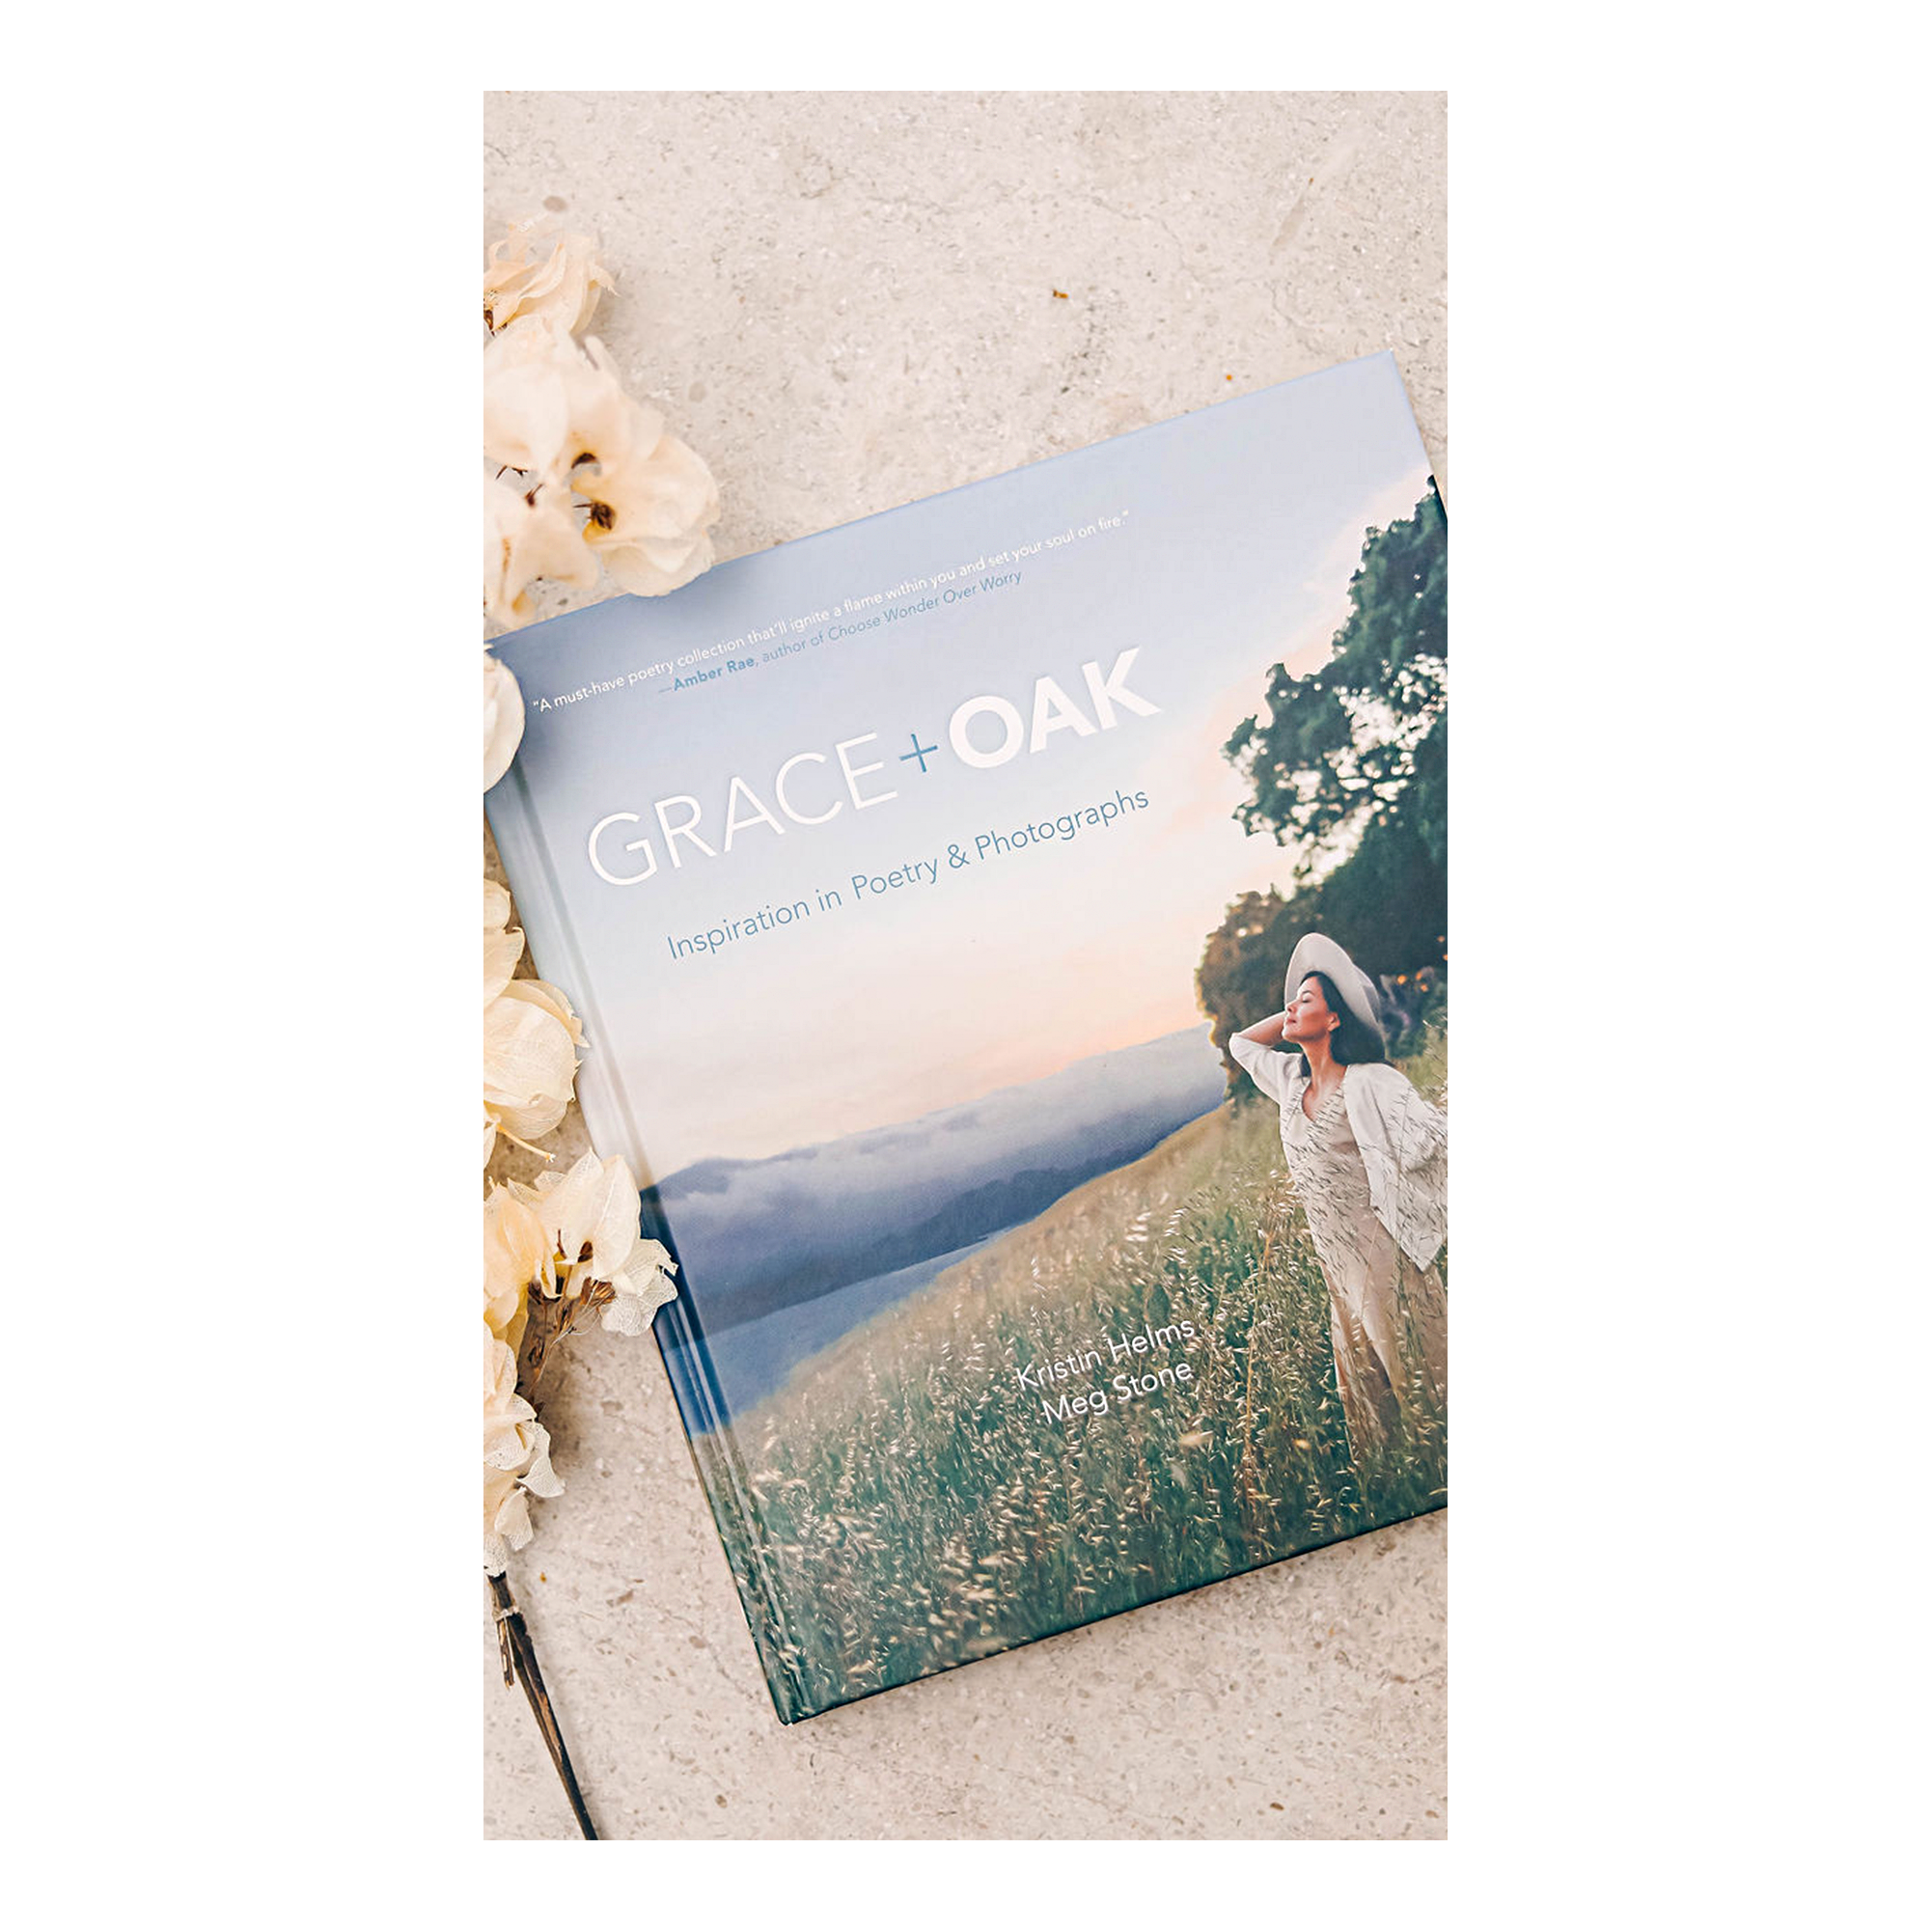 Grace + Oak: Inspiration in Poetry and Photographs-Sea Biscuit Del Mar